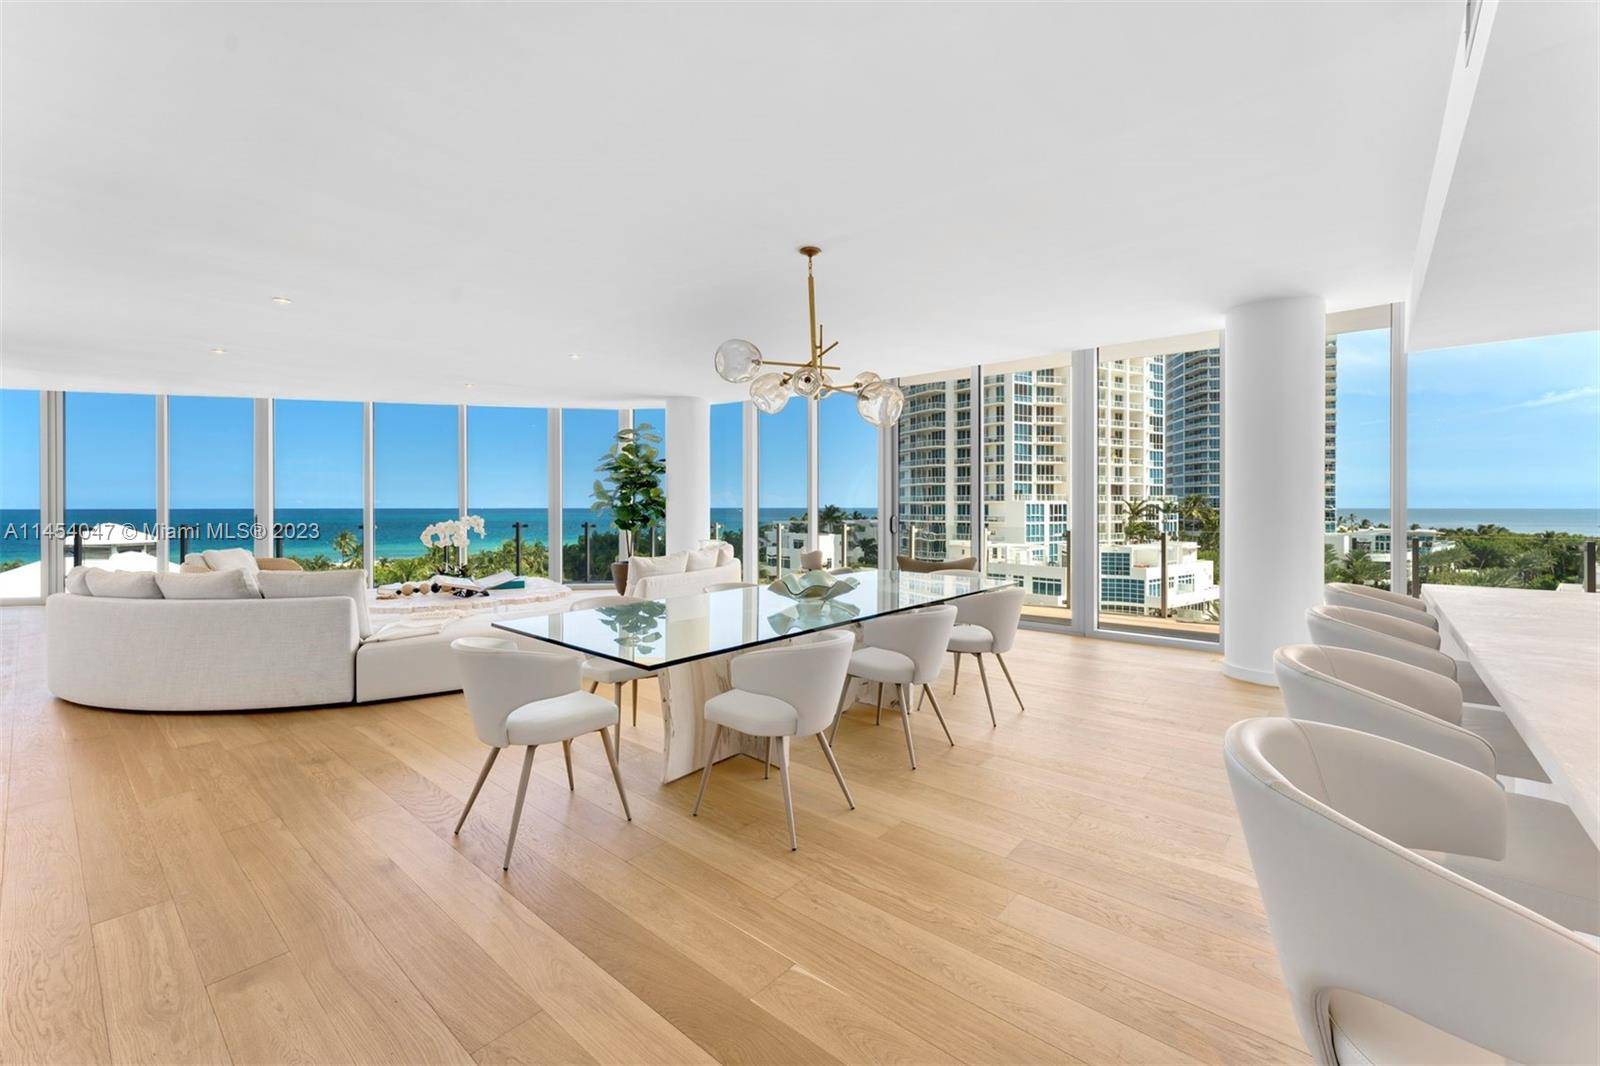 Embrace modern luxury living in this Penthouse with private rooftop at the heart of South of Fifth at One Ocean, where a waterfront lifestyle meets the vibrancy of the city.